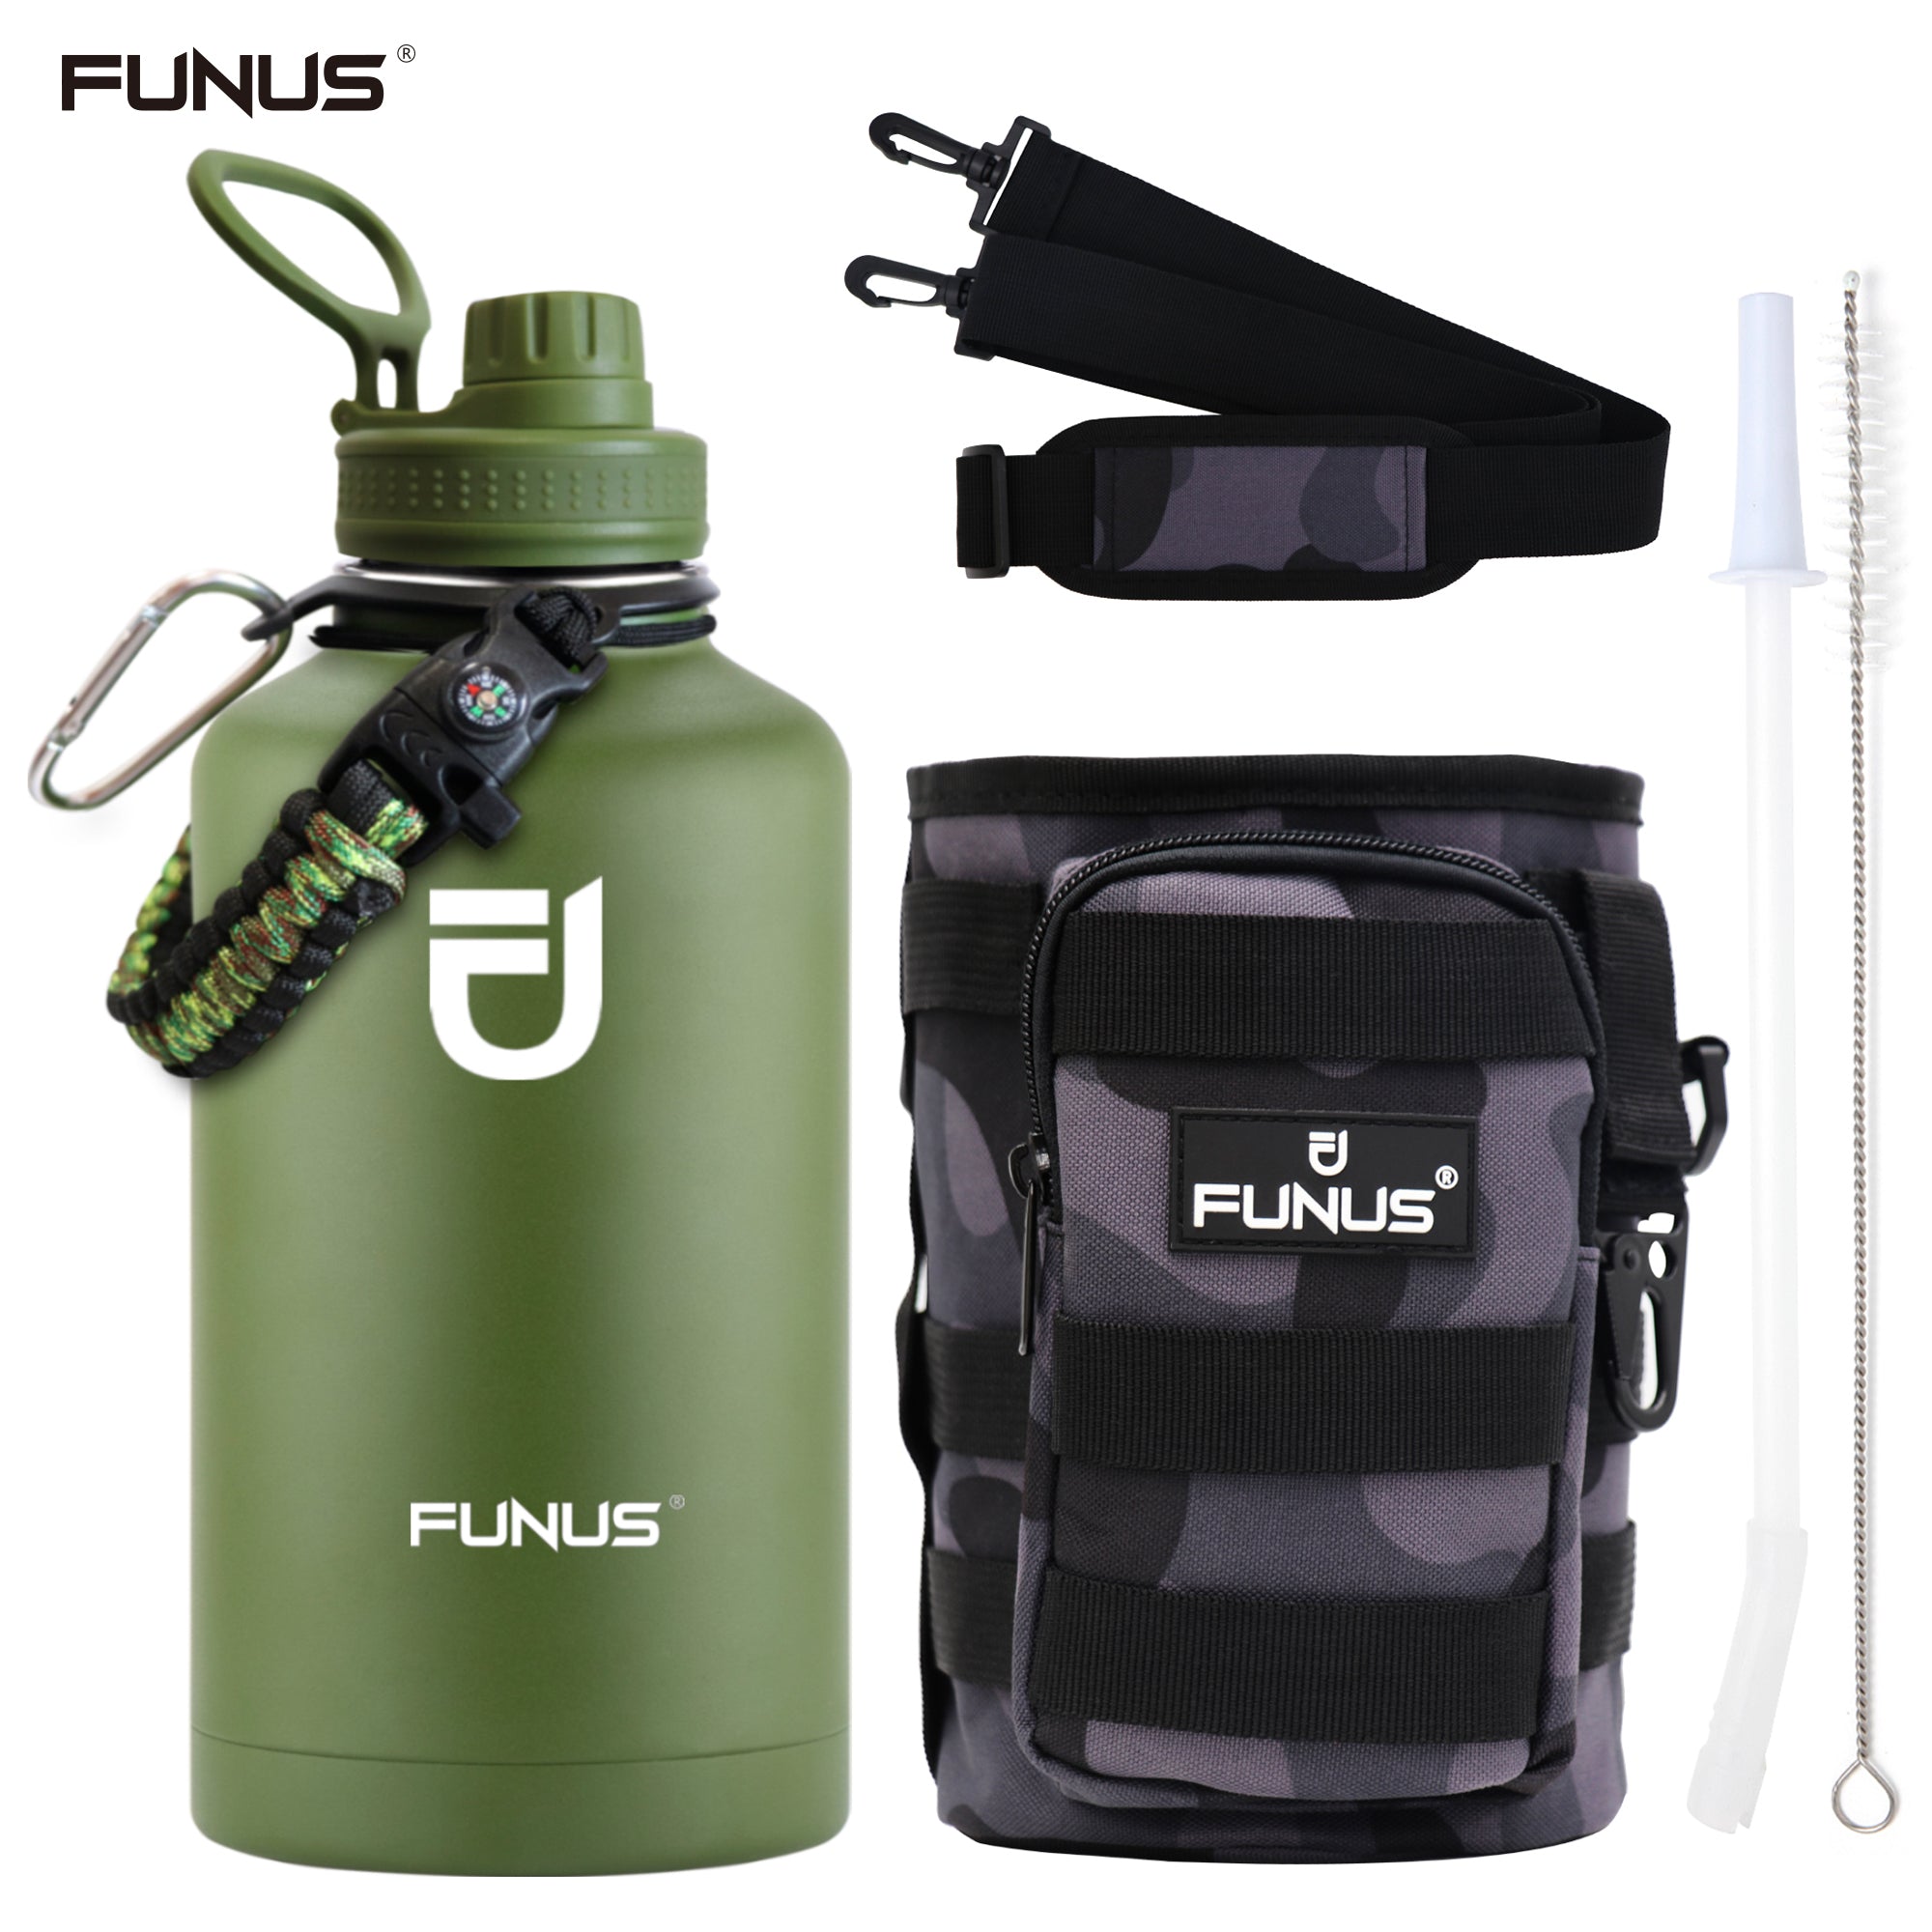 FUNUS 64oz Insulated Water Bottle With Carrier Bag & Paracord Handle For Sports,Gm,Outdoors camo